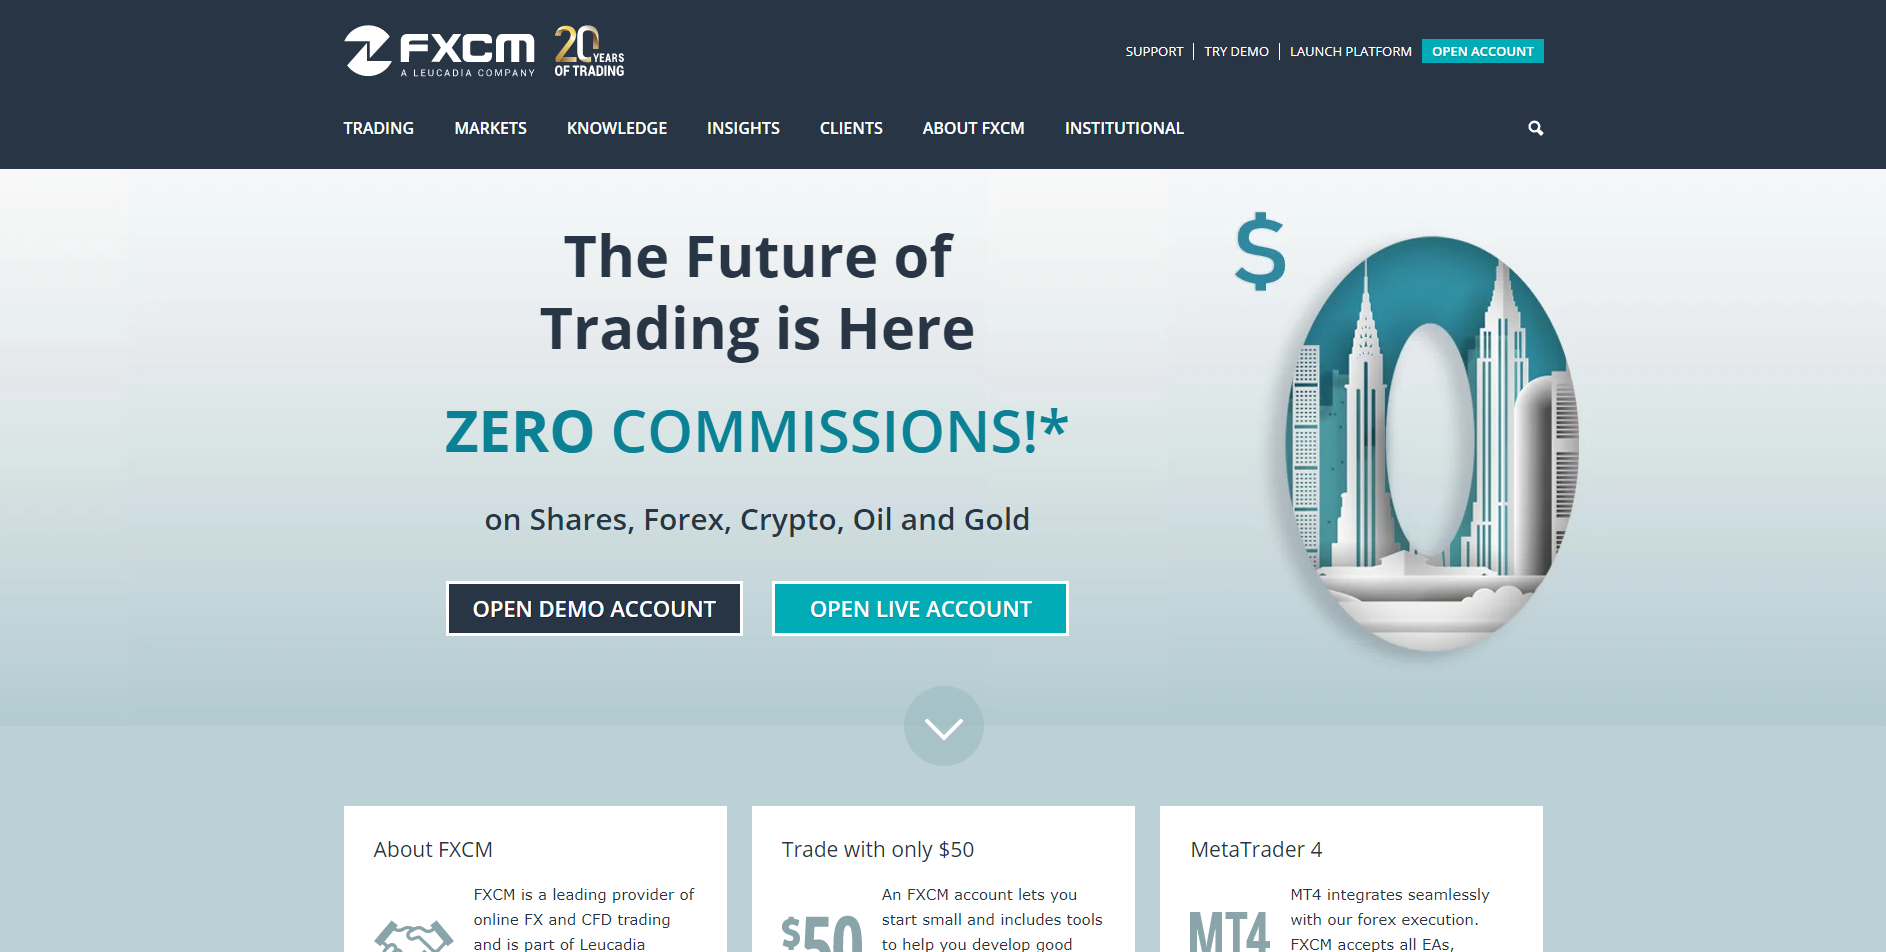 Official website of the forex broker FXCM in Europe